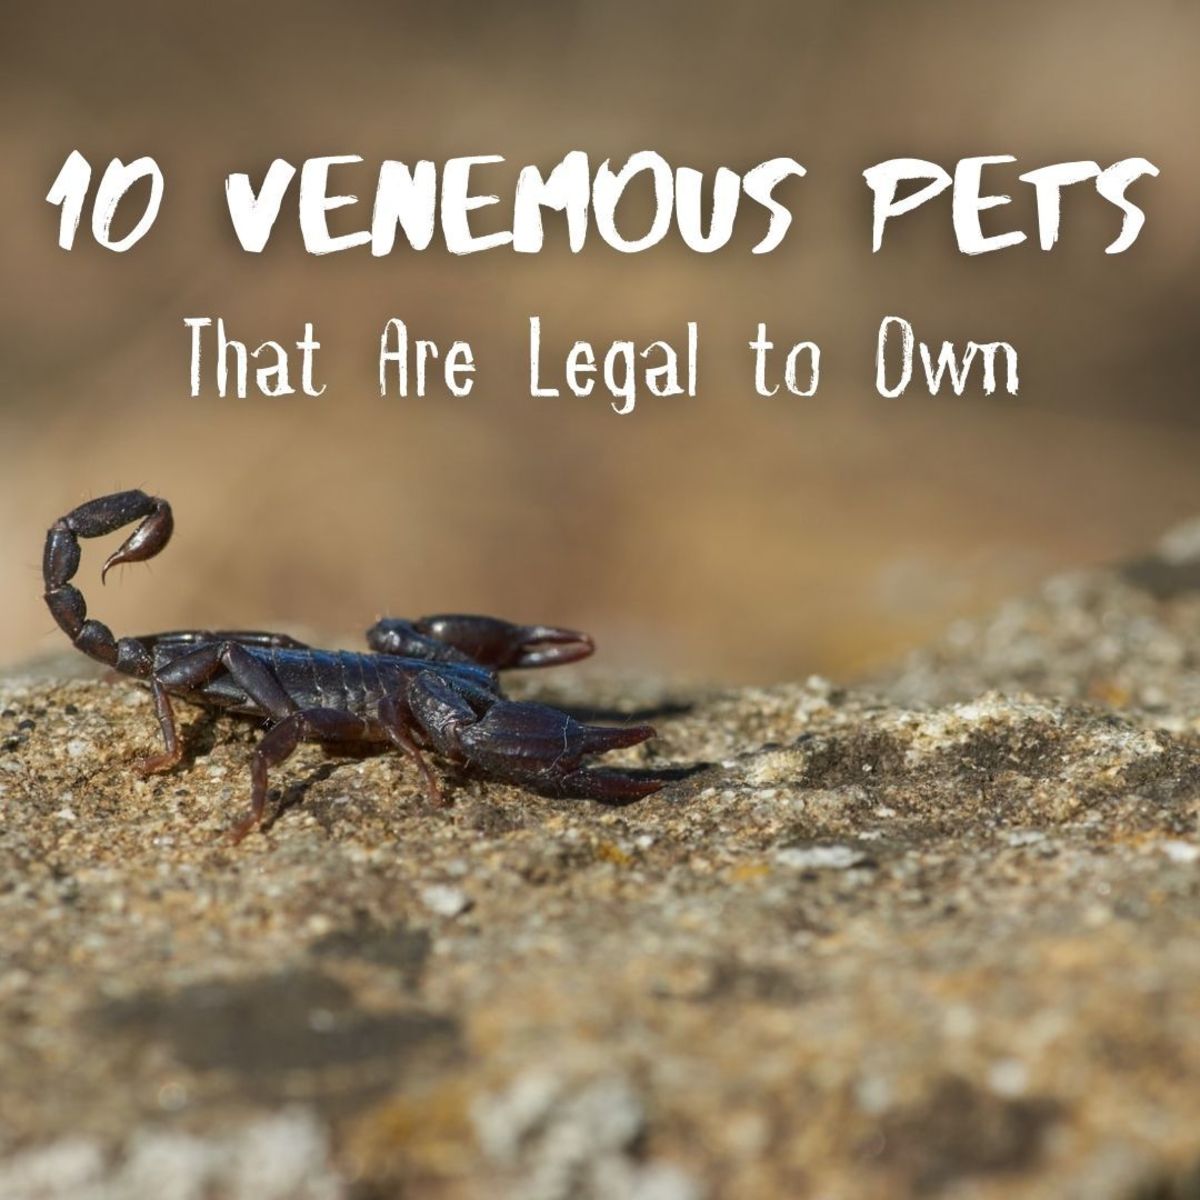 10 Venomous Pets That Are Legal to Own